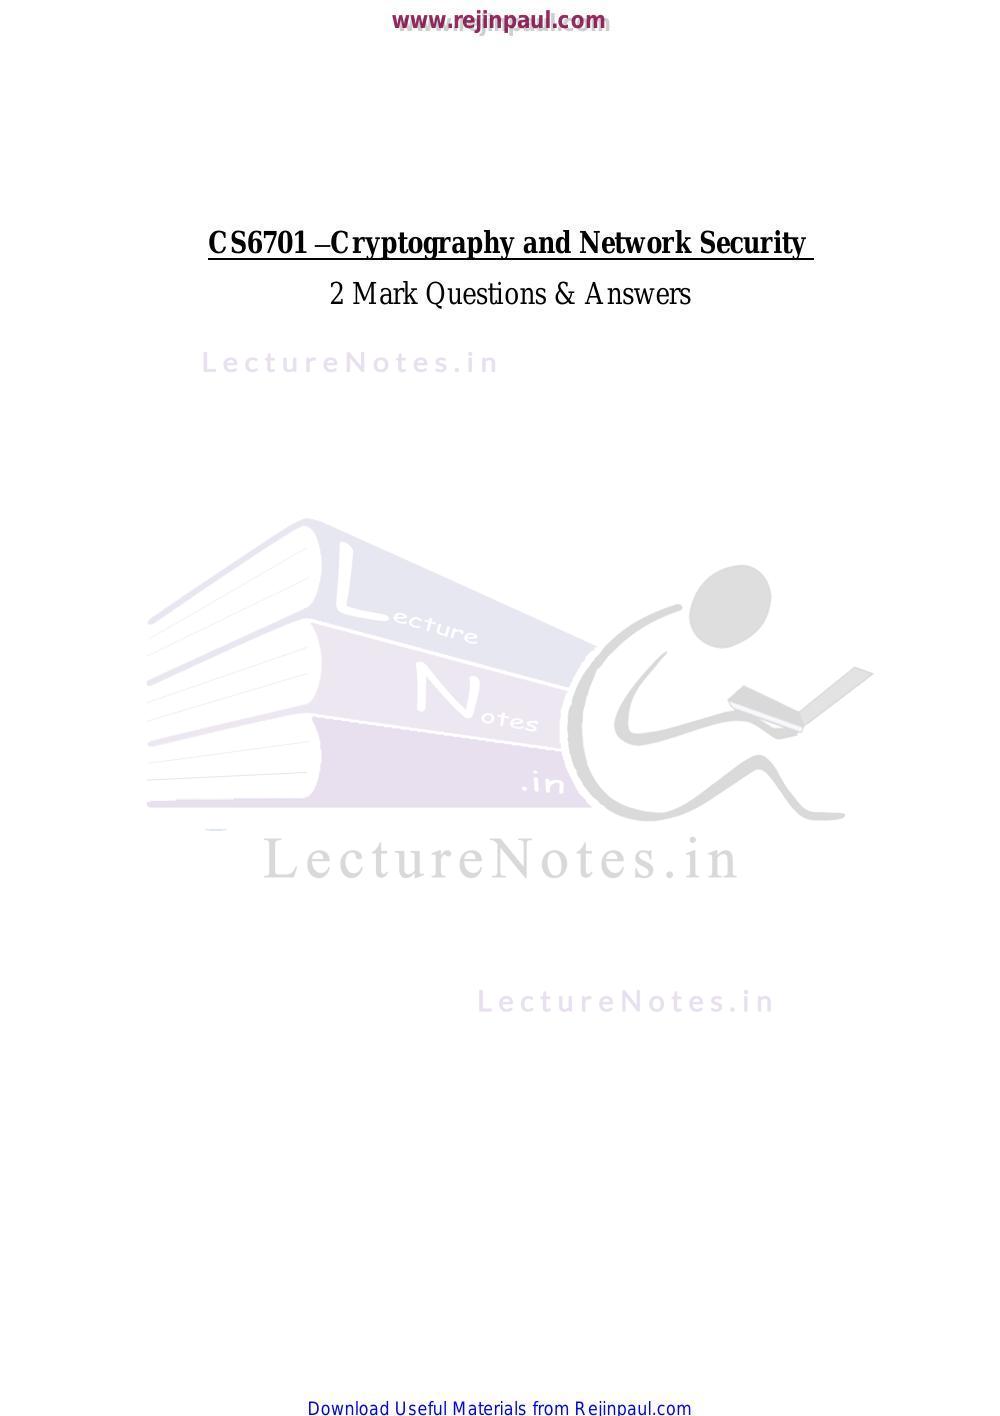 Cryptography and network security by behrouz a forouzan solution manual pdf